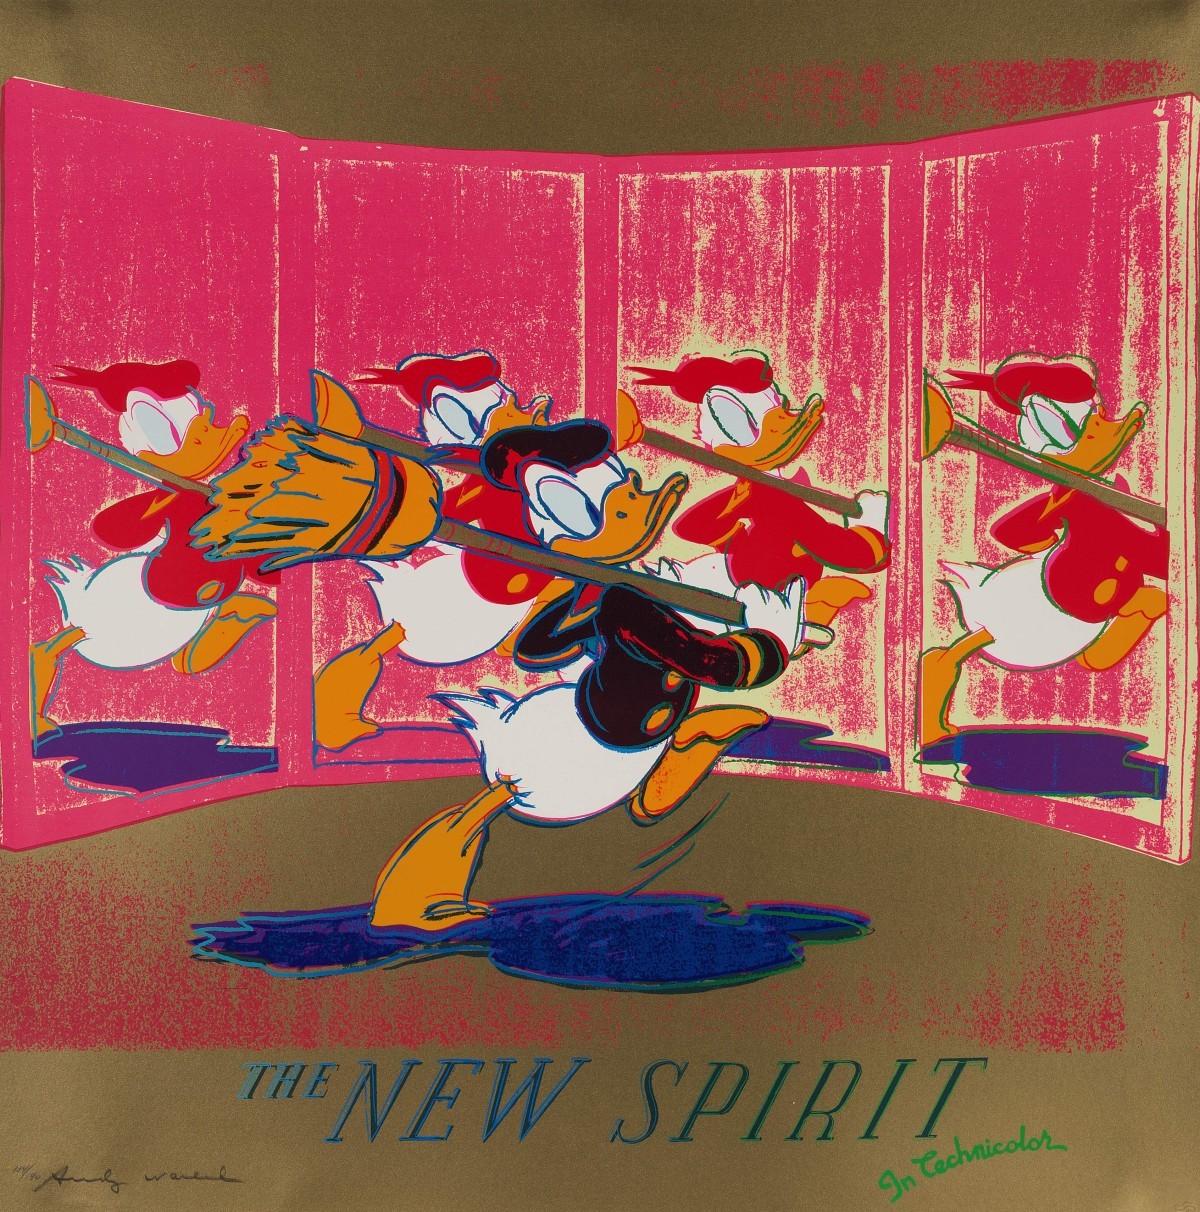 The New Spirit, from Ads